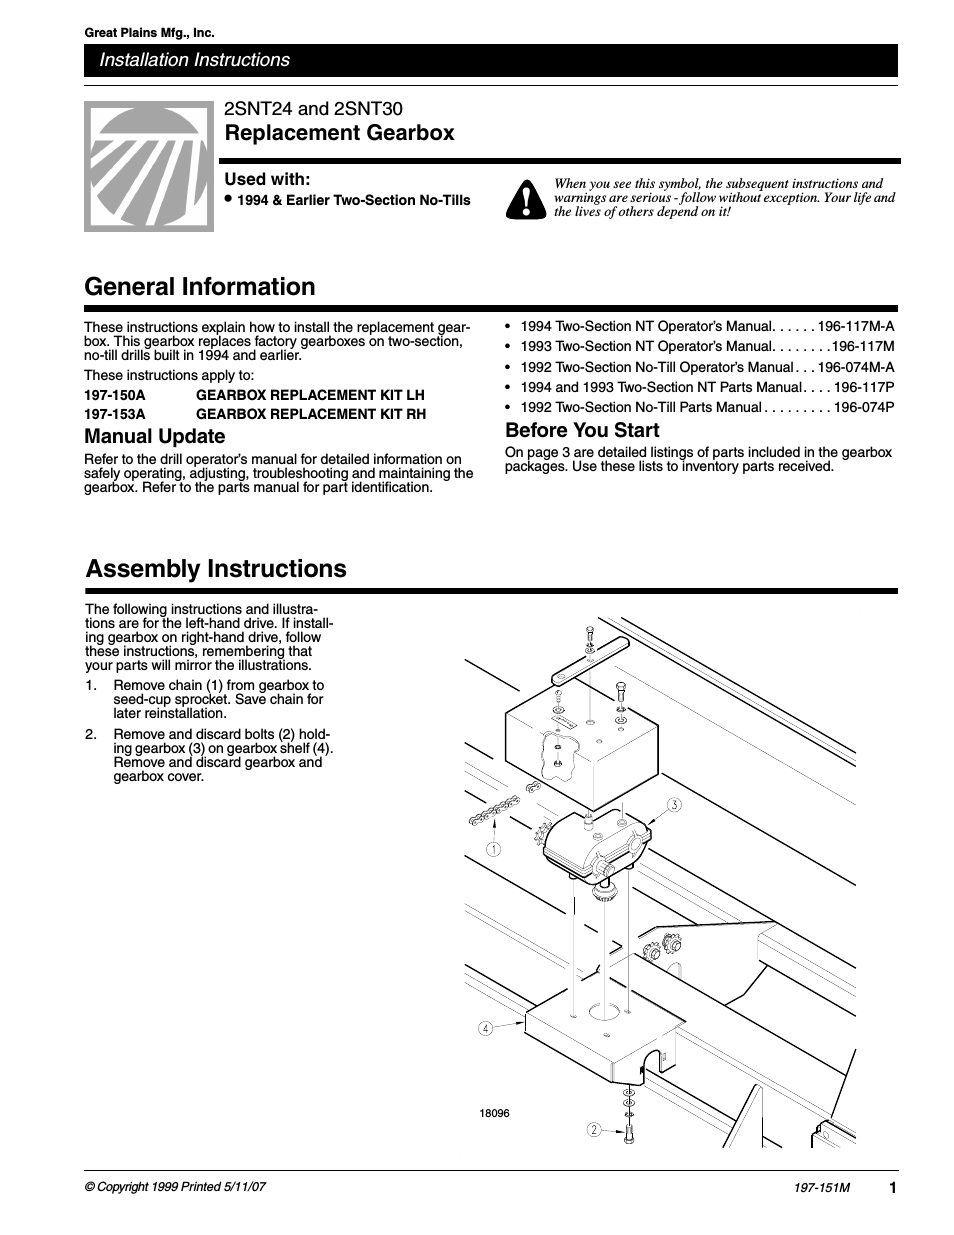 2SNT24 Assembly Instructions